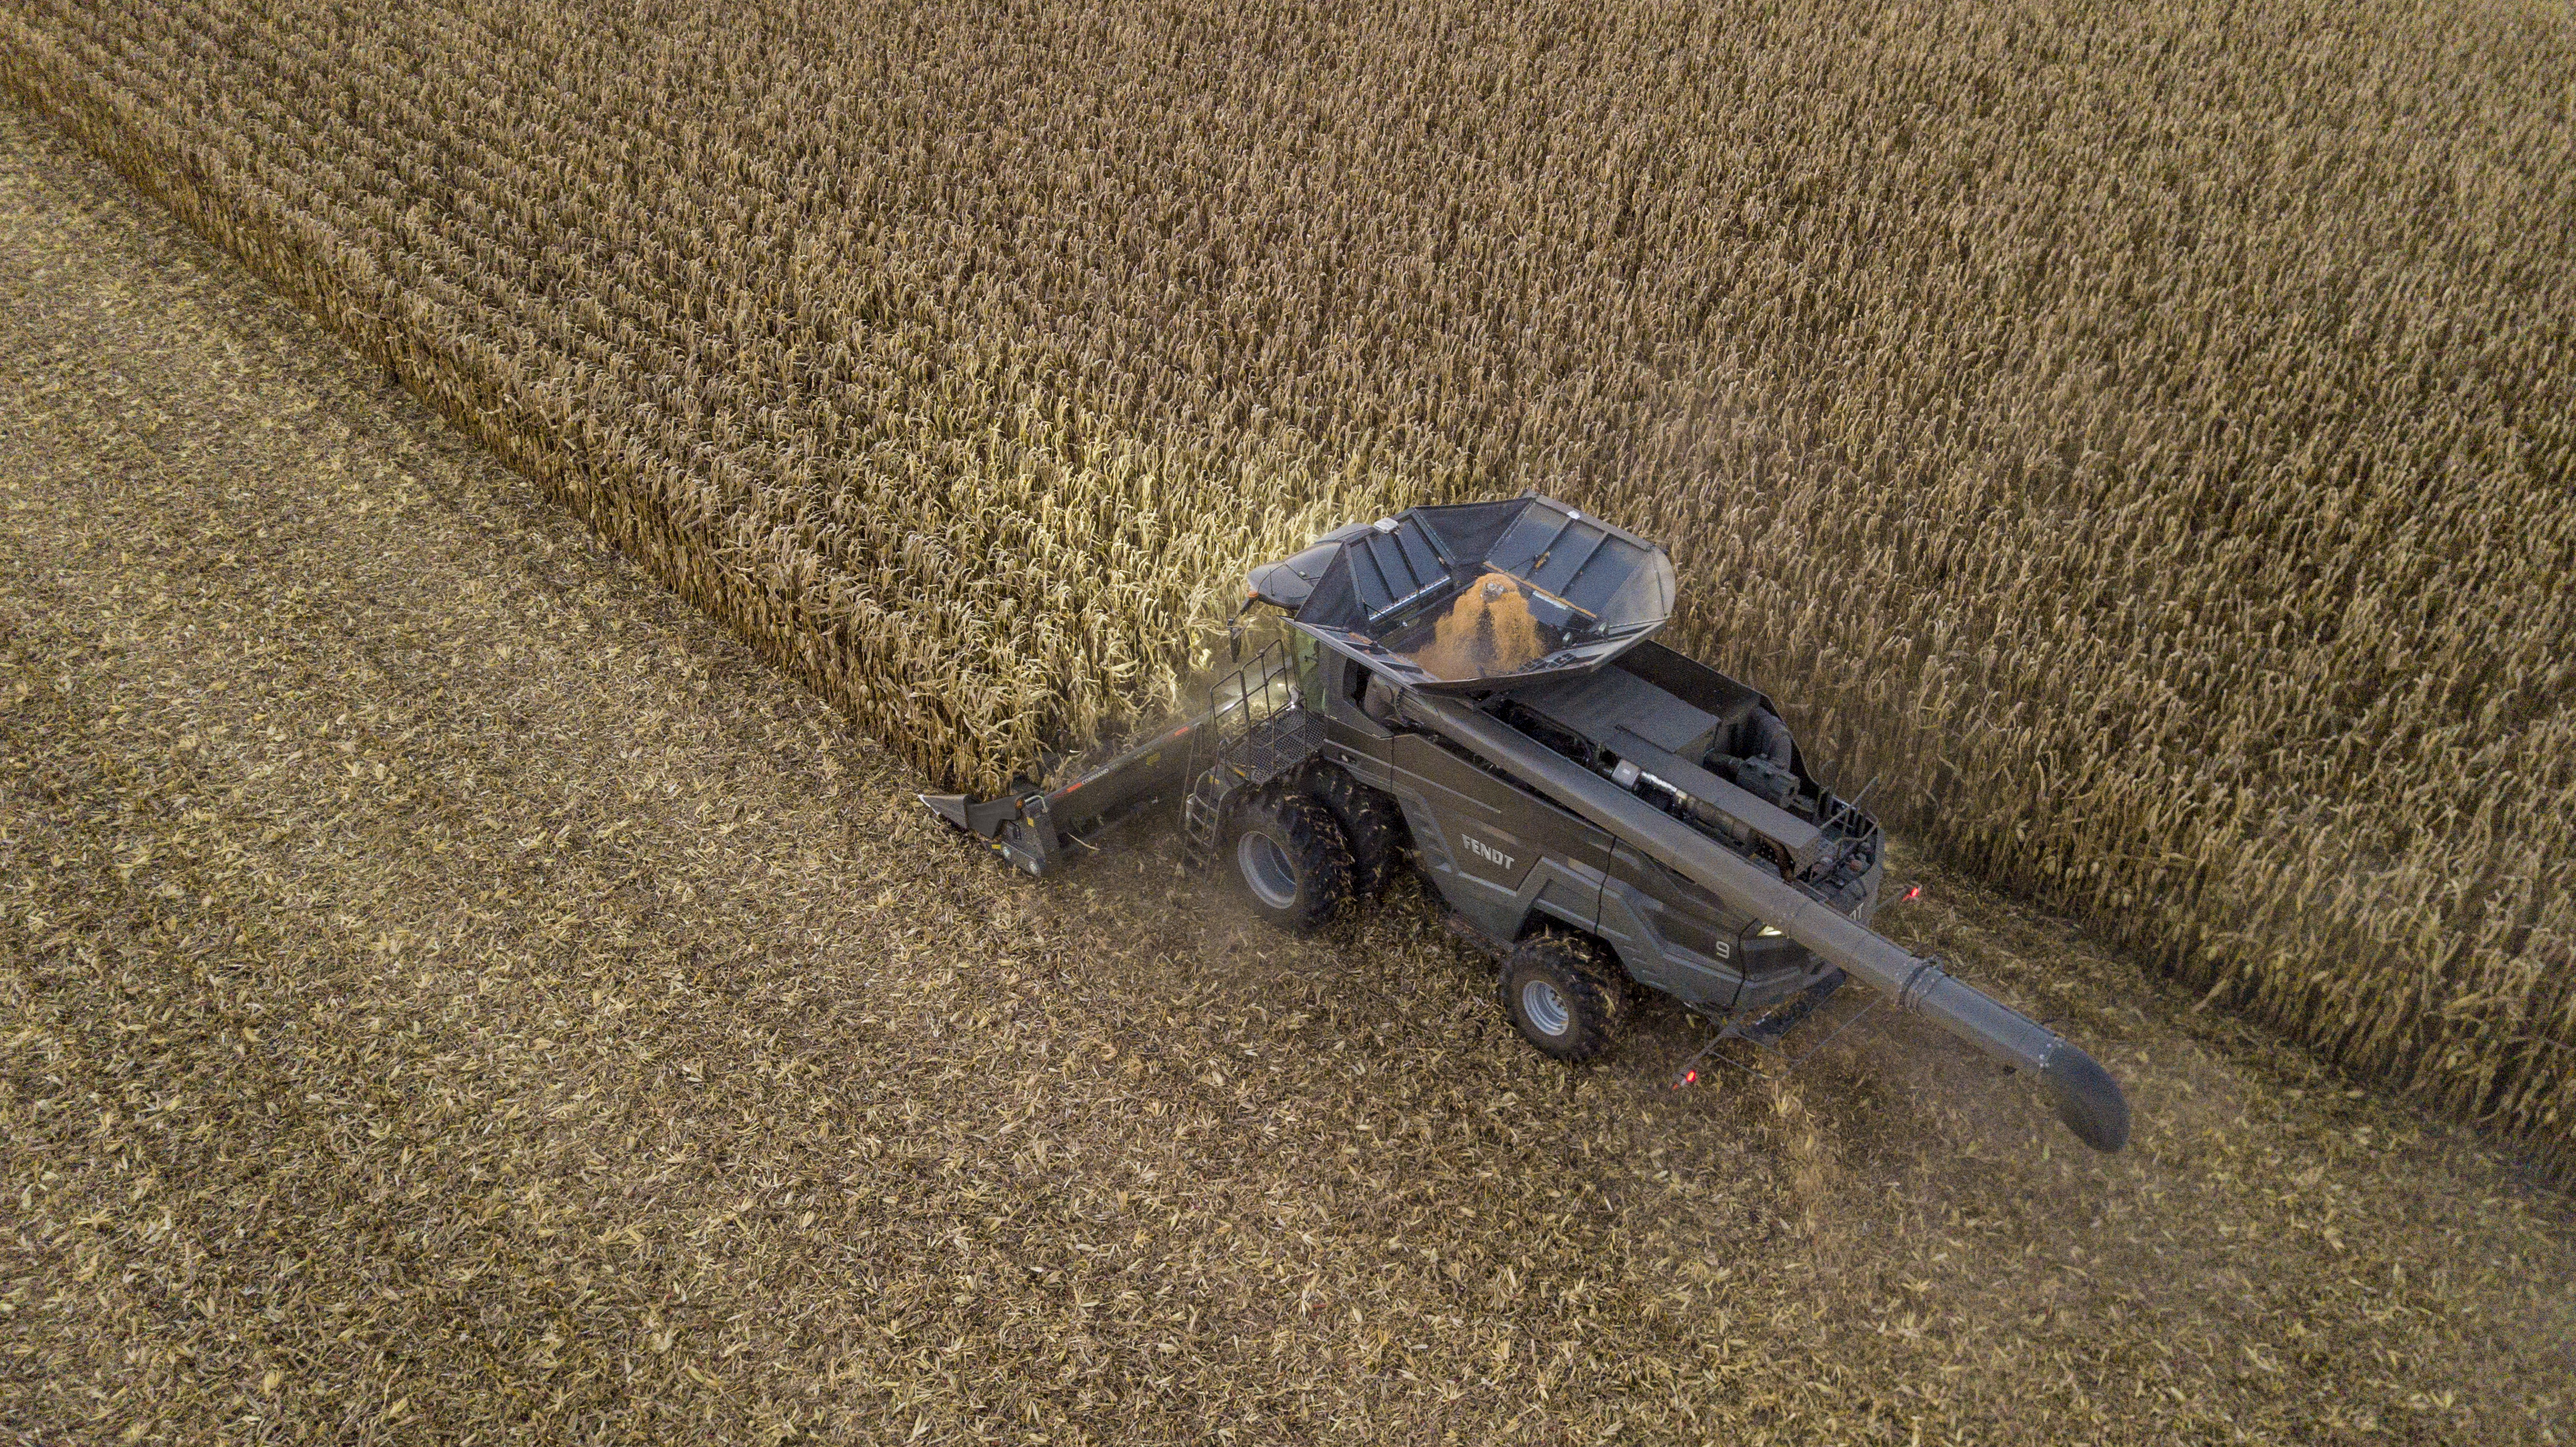 Ideal Combine in the field